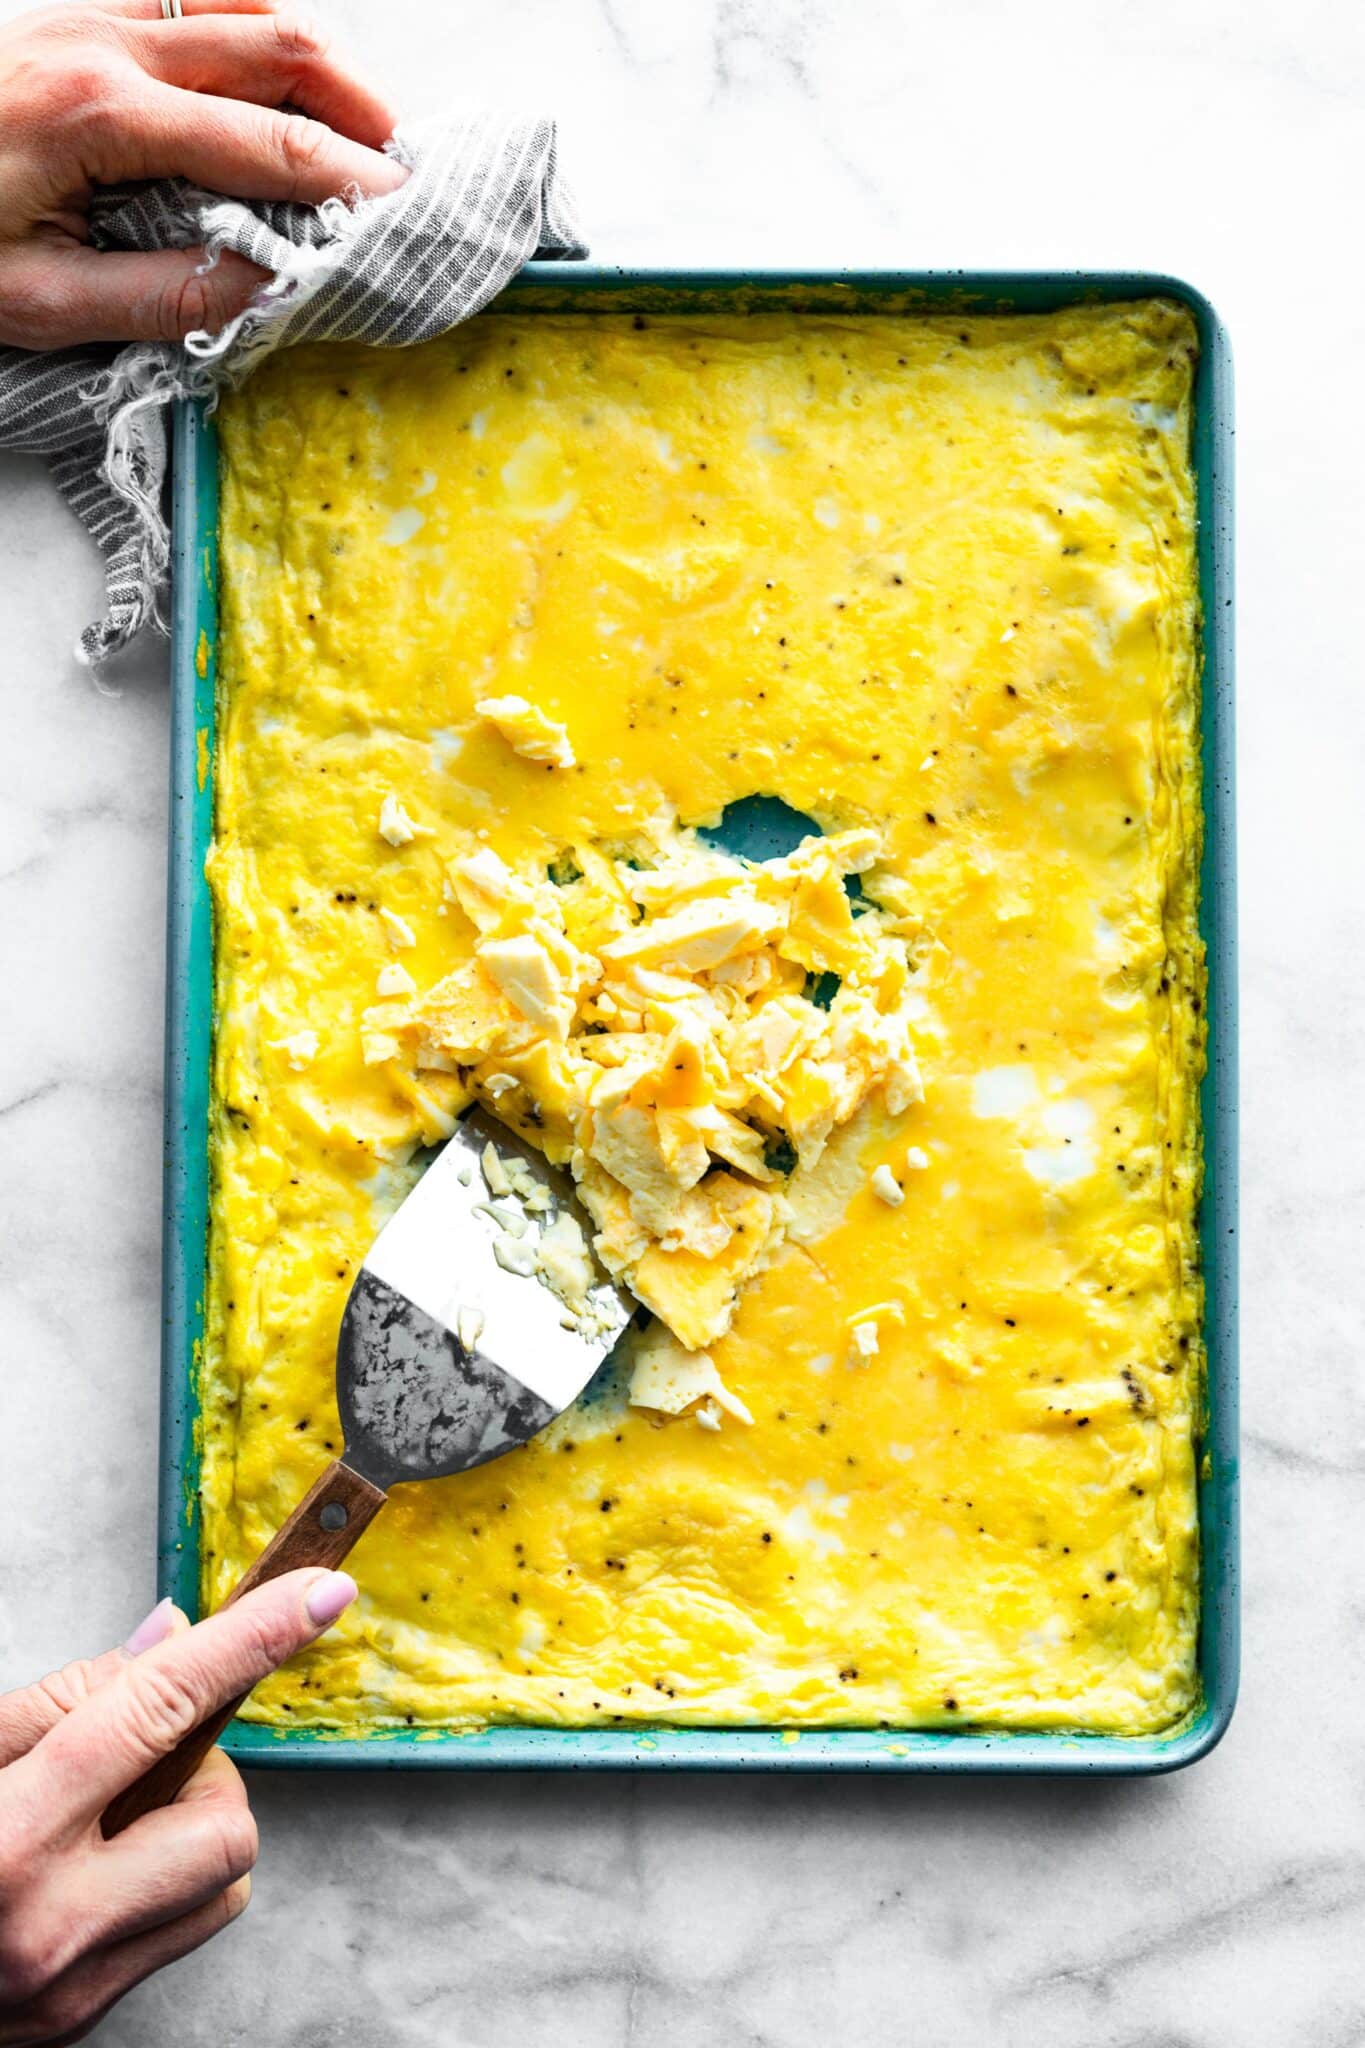 Overhead photo of oven baked scrambled eggs and a woman's hands with a spatula.